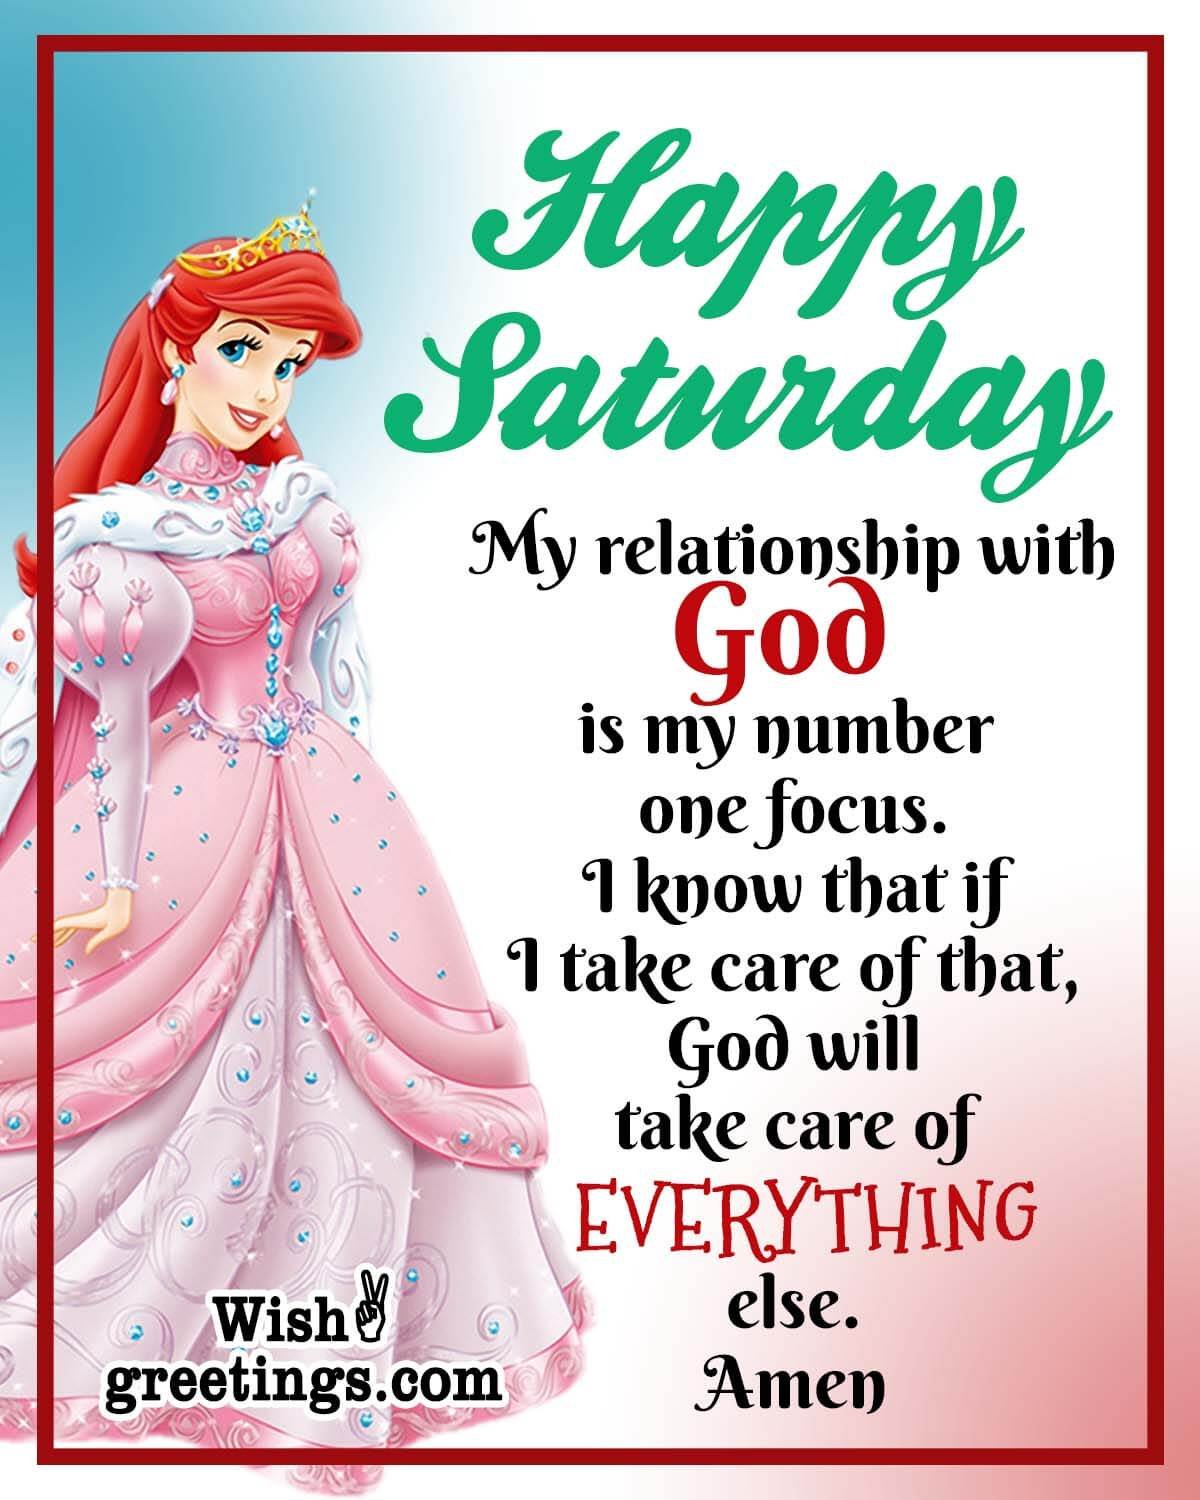 Happy Saturday Status About God